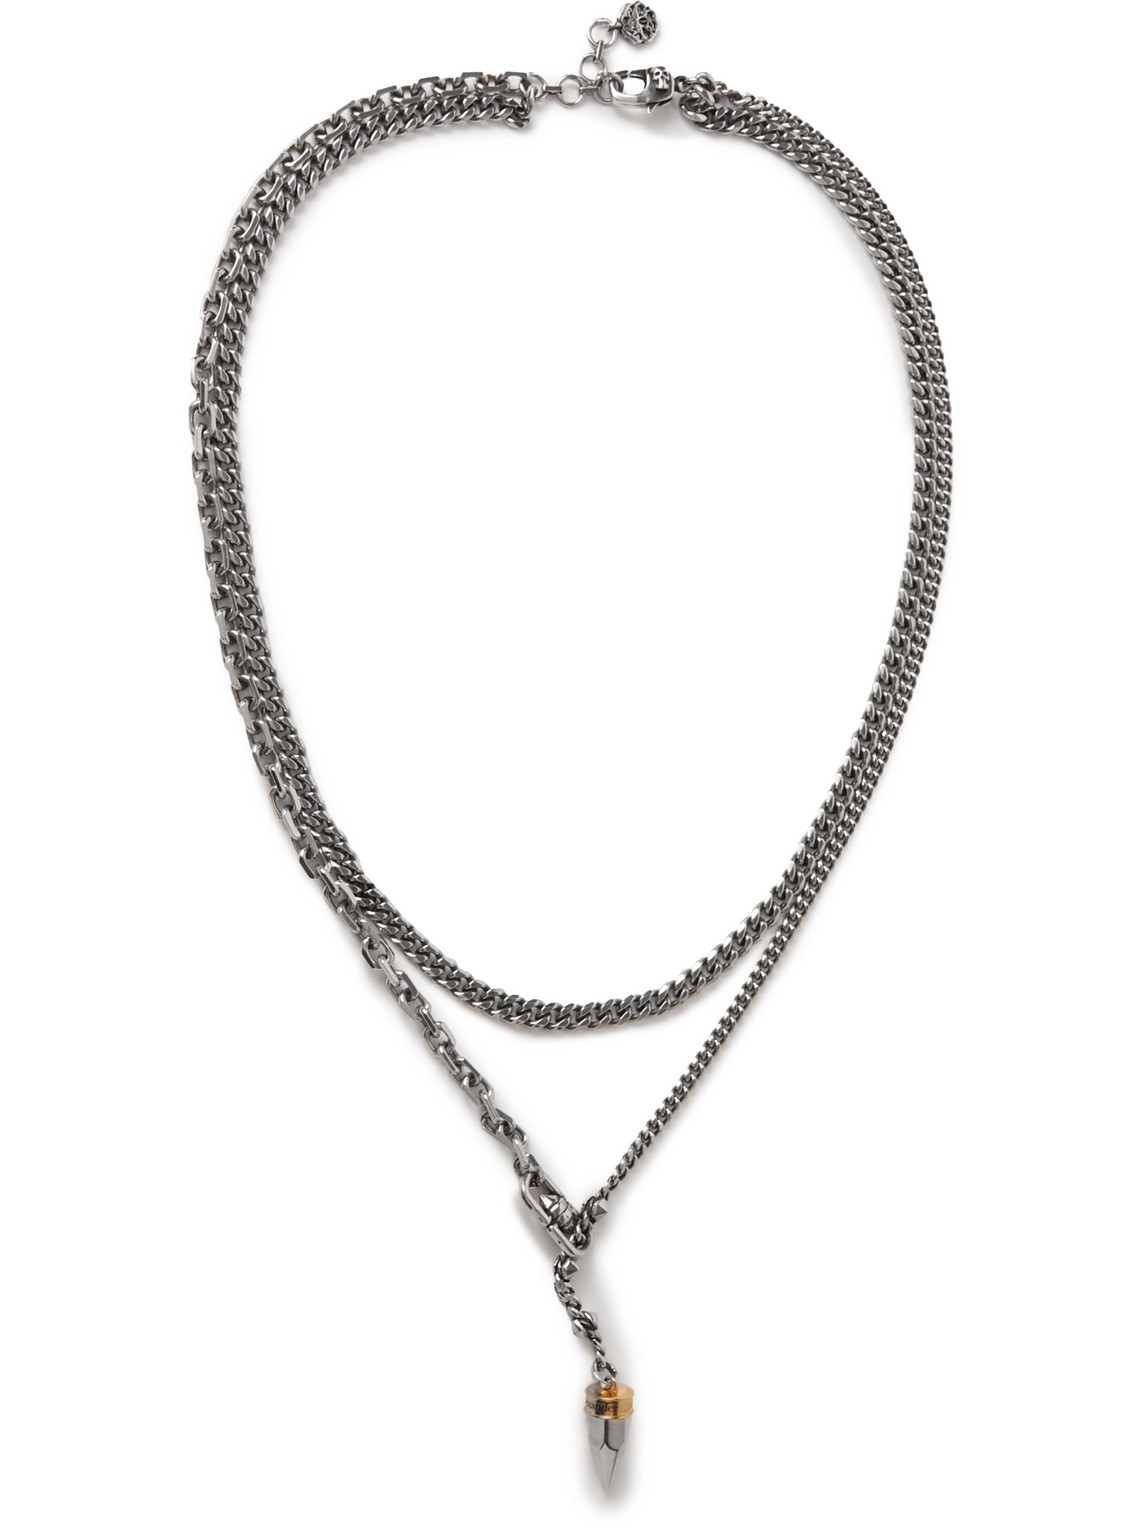 ALEXANDER MCQUEEN BURNISHED SILVER- AND GOLD-TONE PENDANT NECKLACE